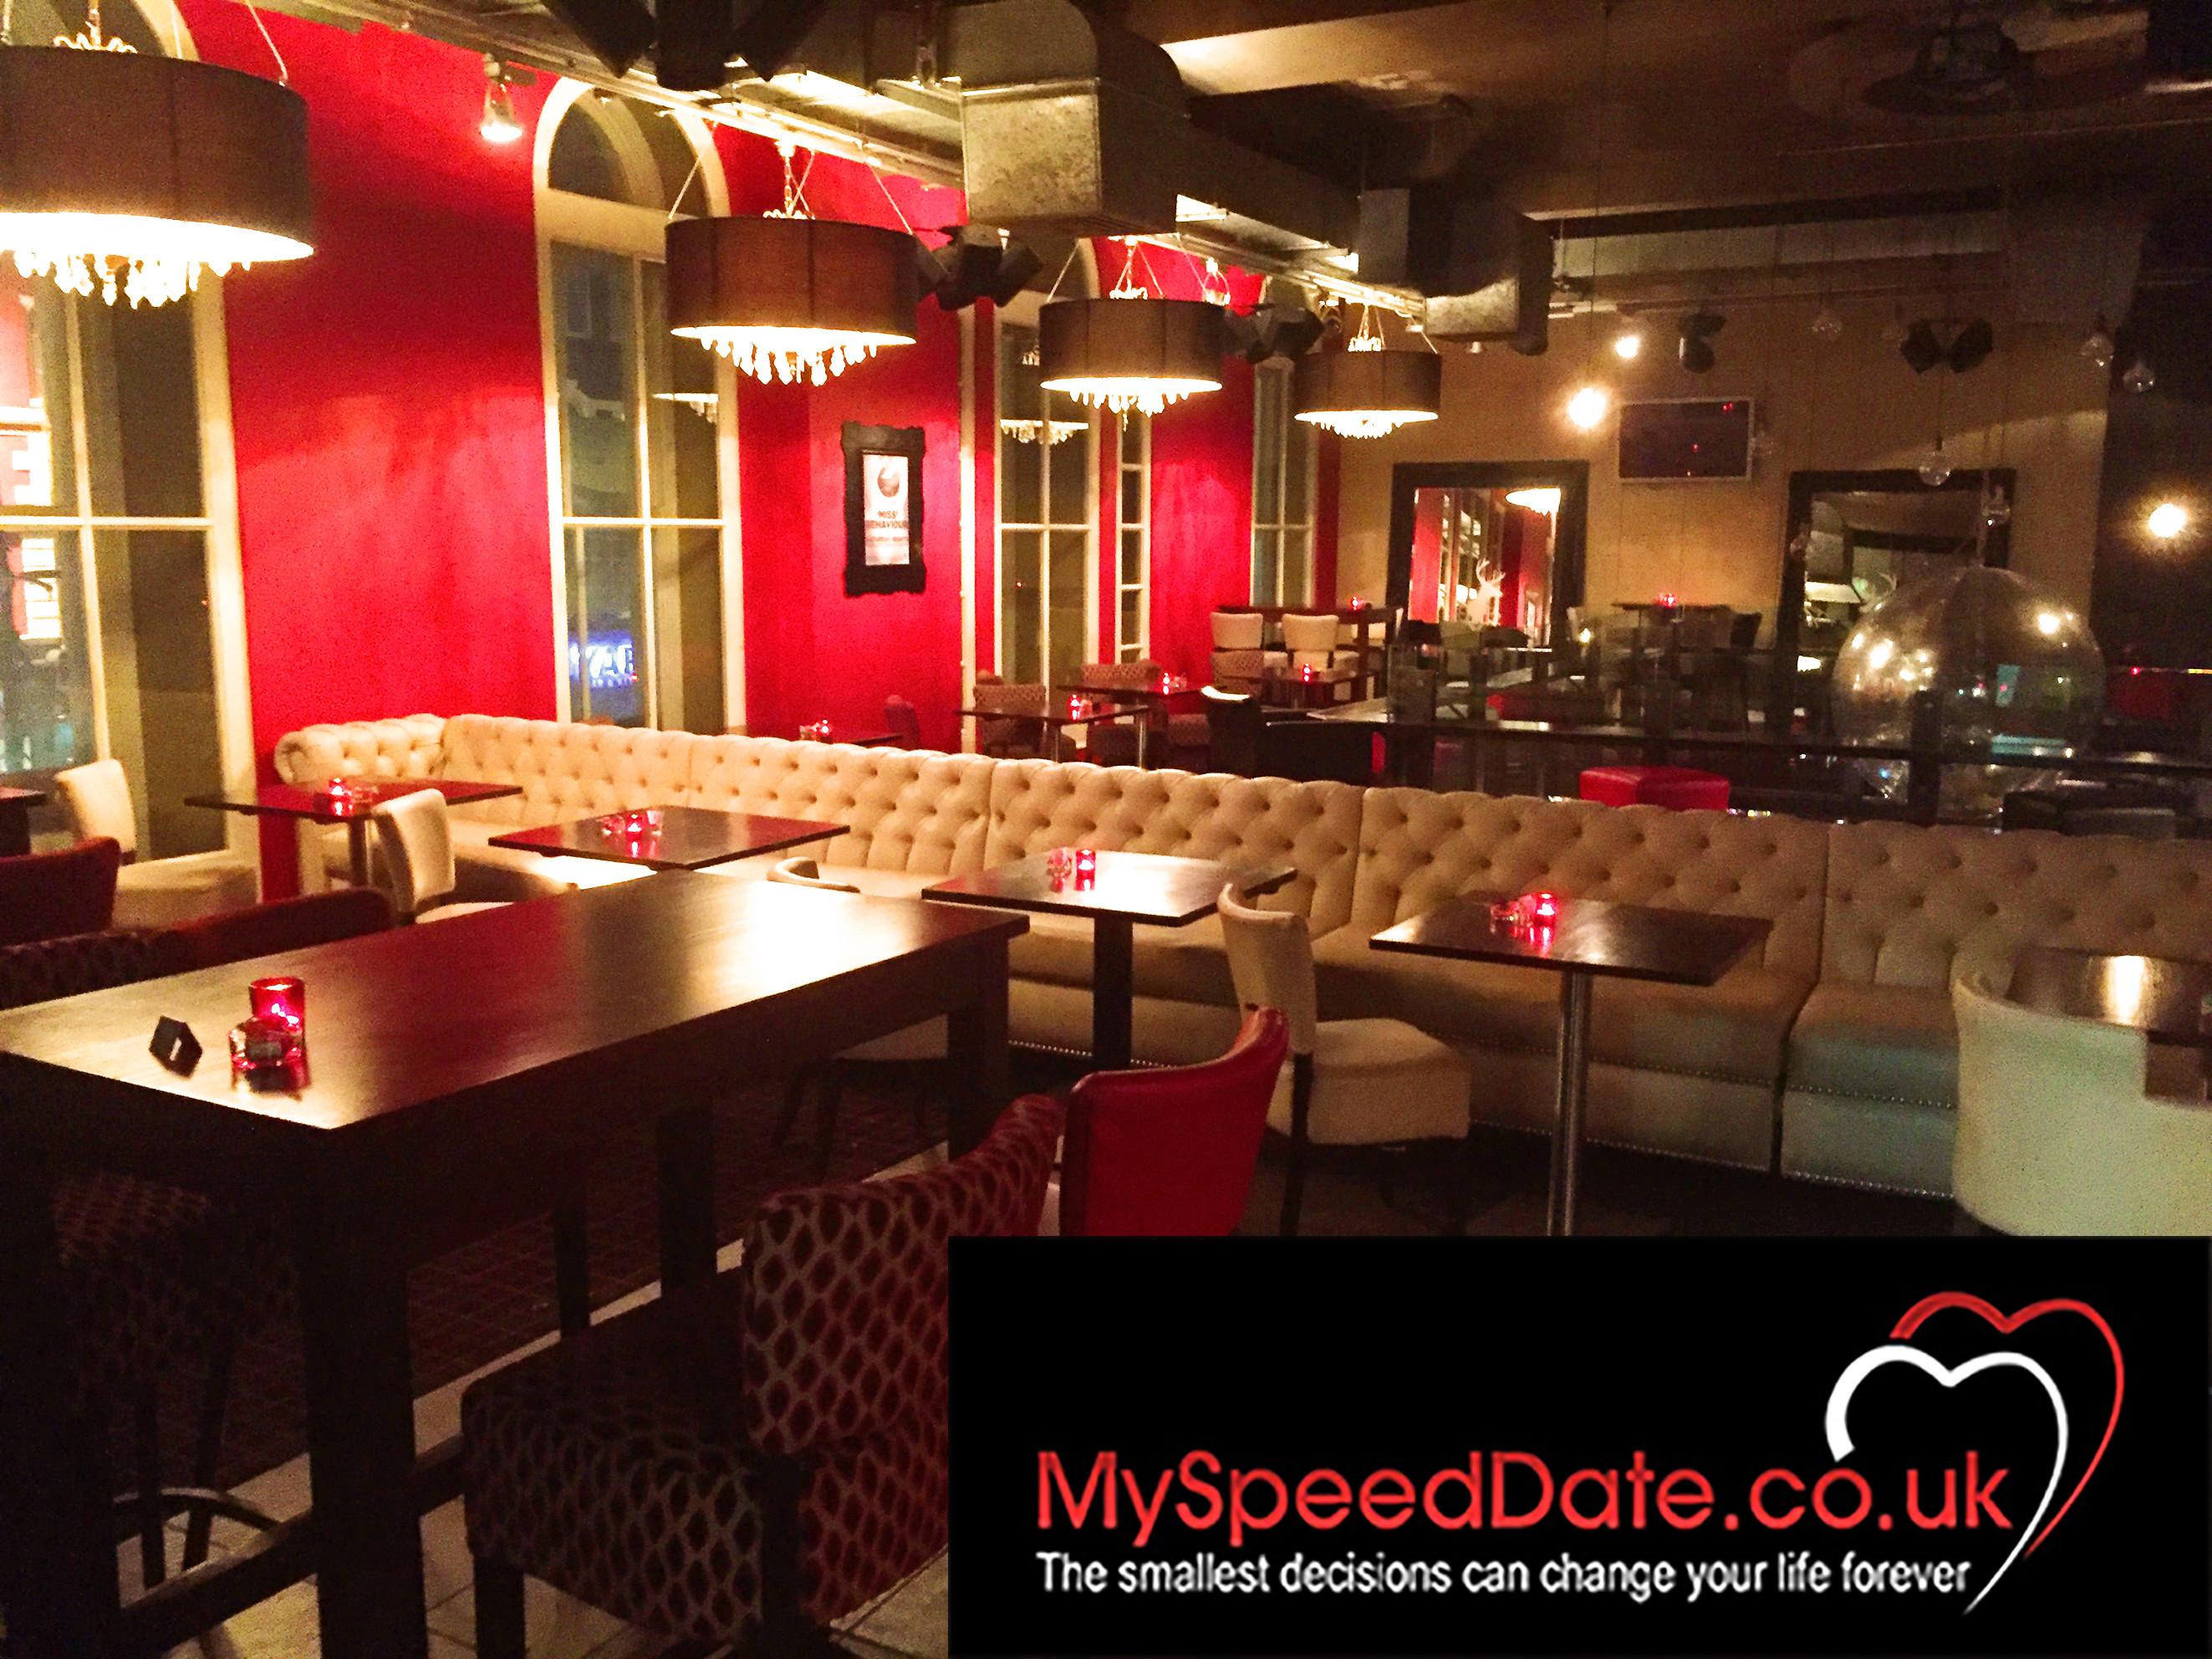 Speed Dating - Â£5 off! at Slug and Lettuce, Cardiff on 18th September